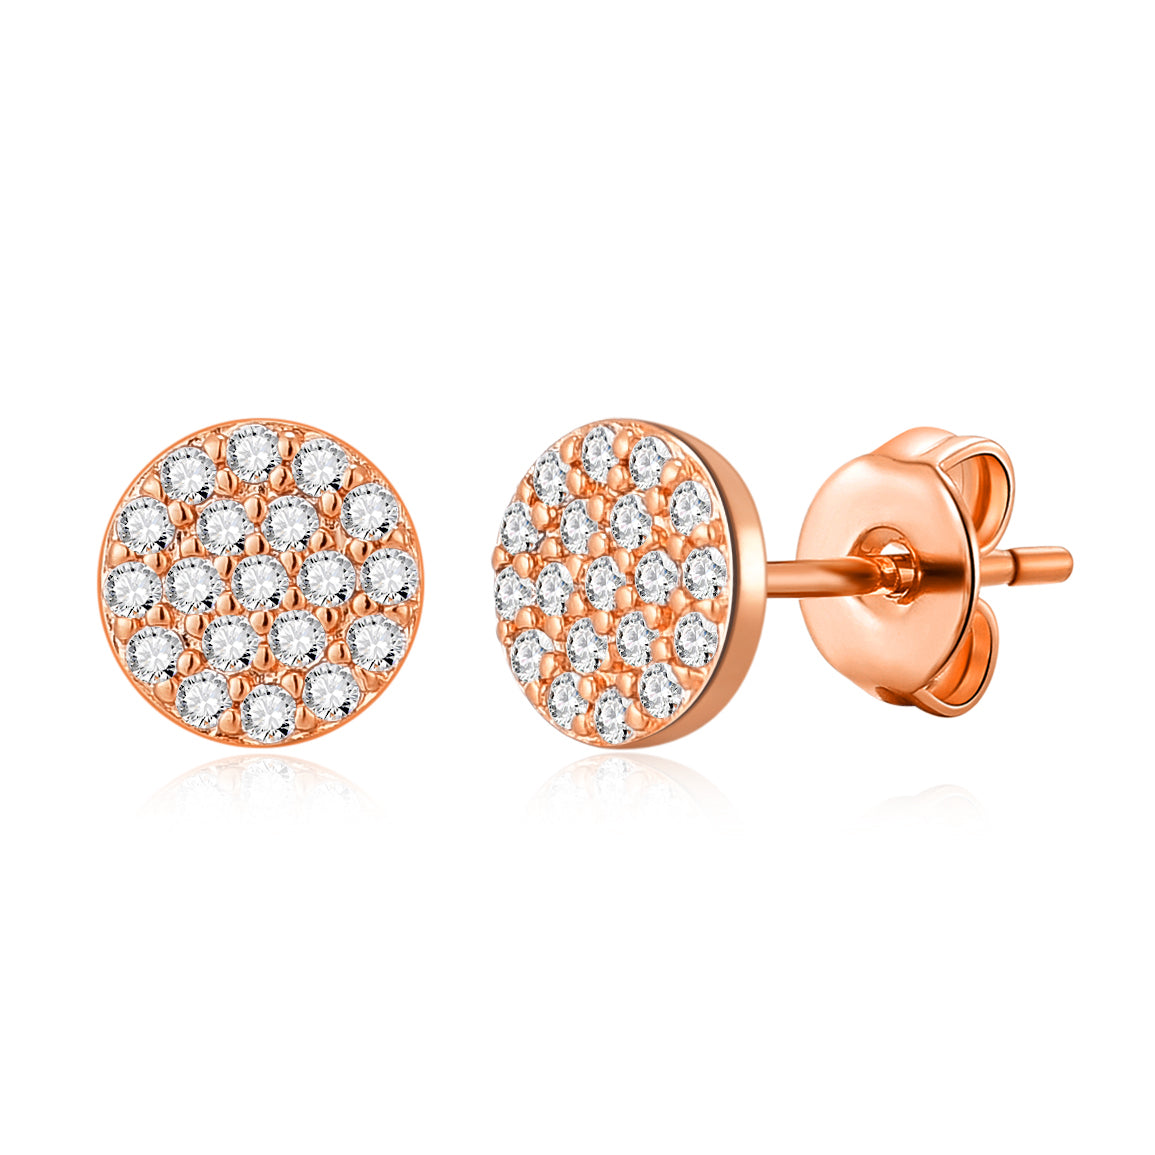 Rose Gold Plated Pave Round Earrings Created with Zircondia® Crystals by Philip Jones Jewellery